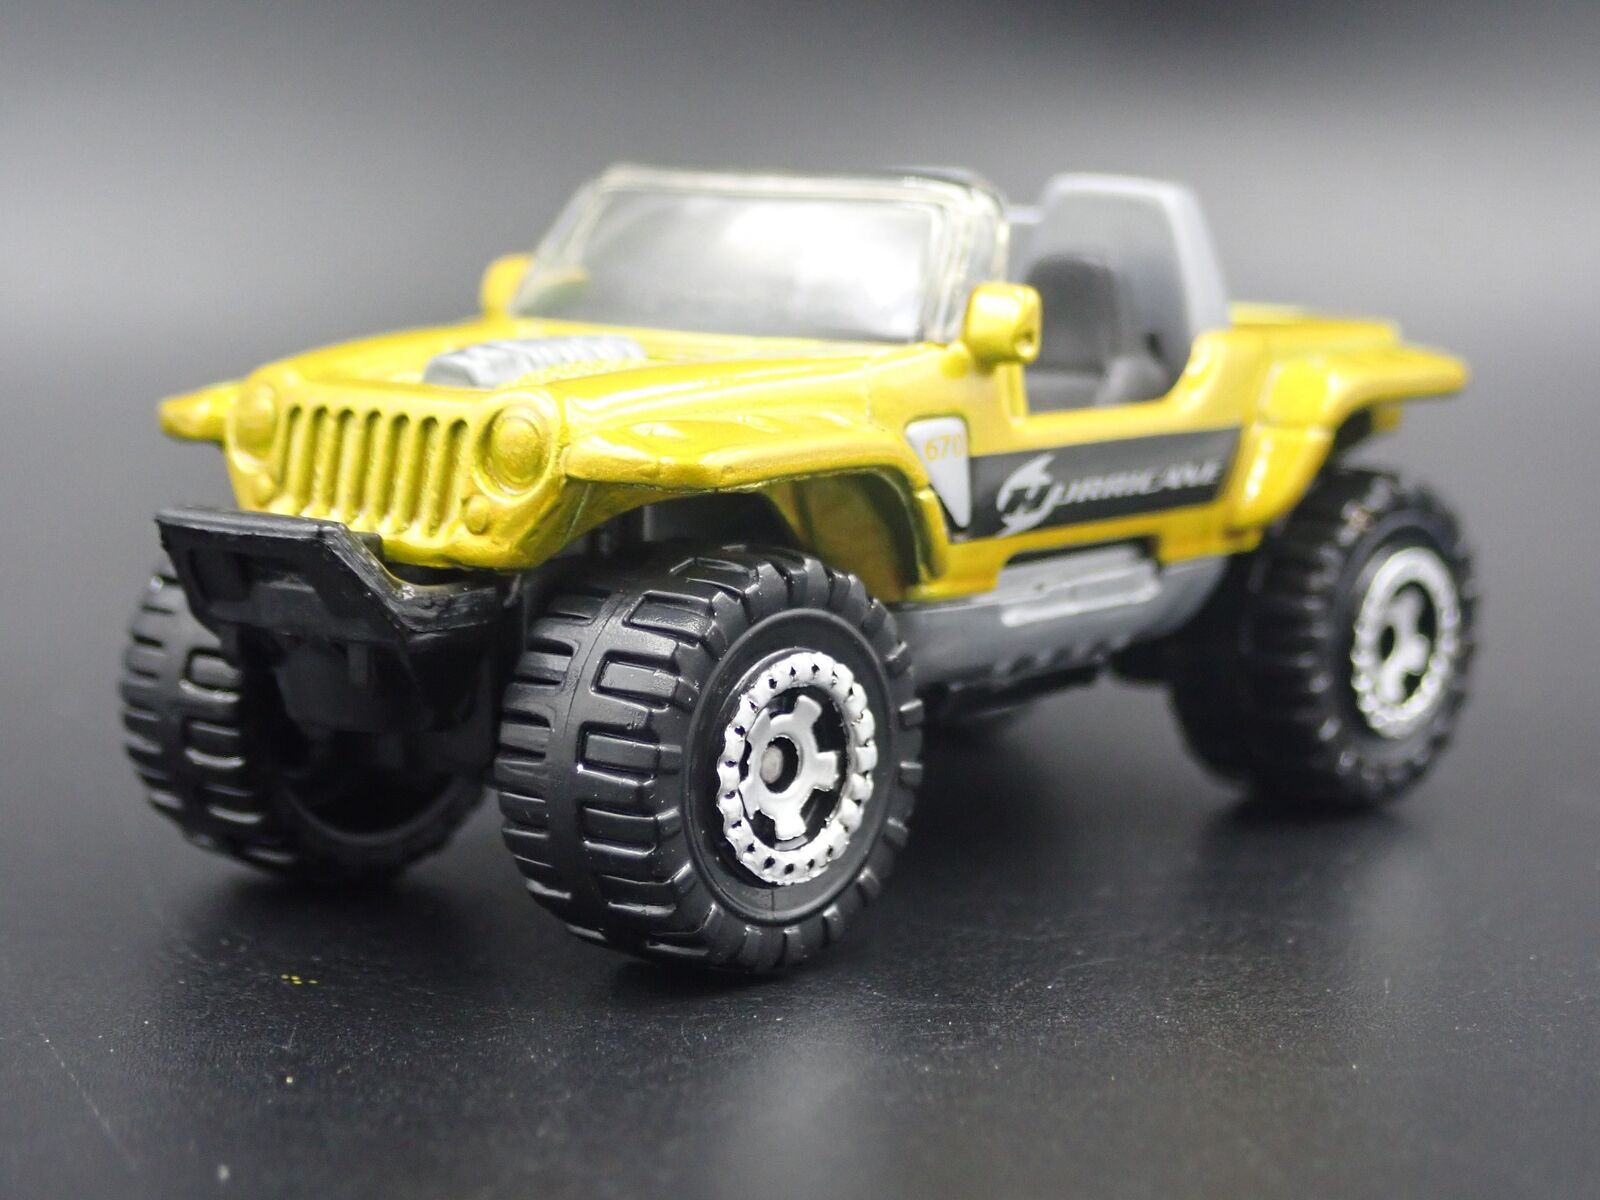 JEEP HURRICANE CONCEPT CAR RARE 1:64 SCALE COLLECTIBLE DIORAMA DIECAST relisted